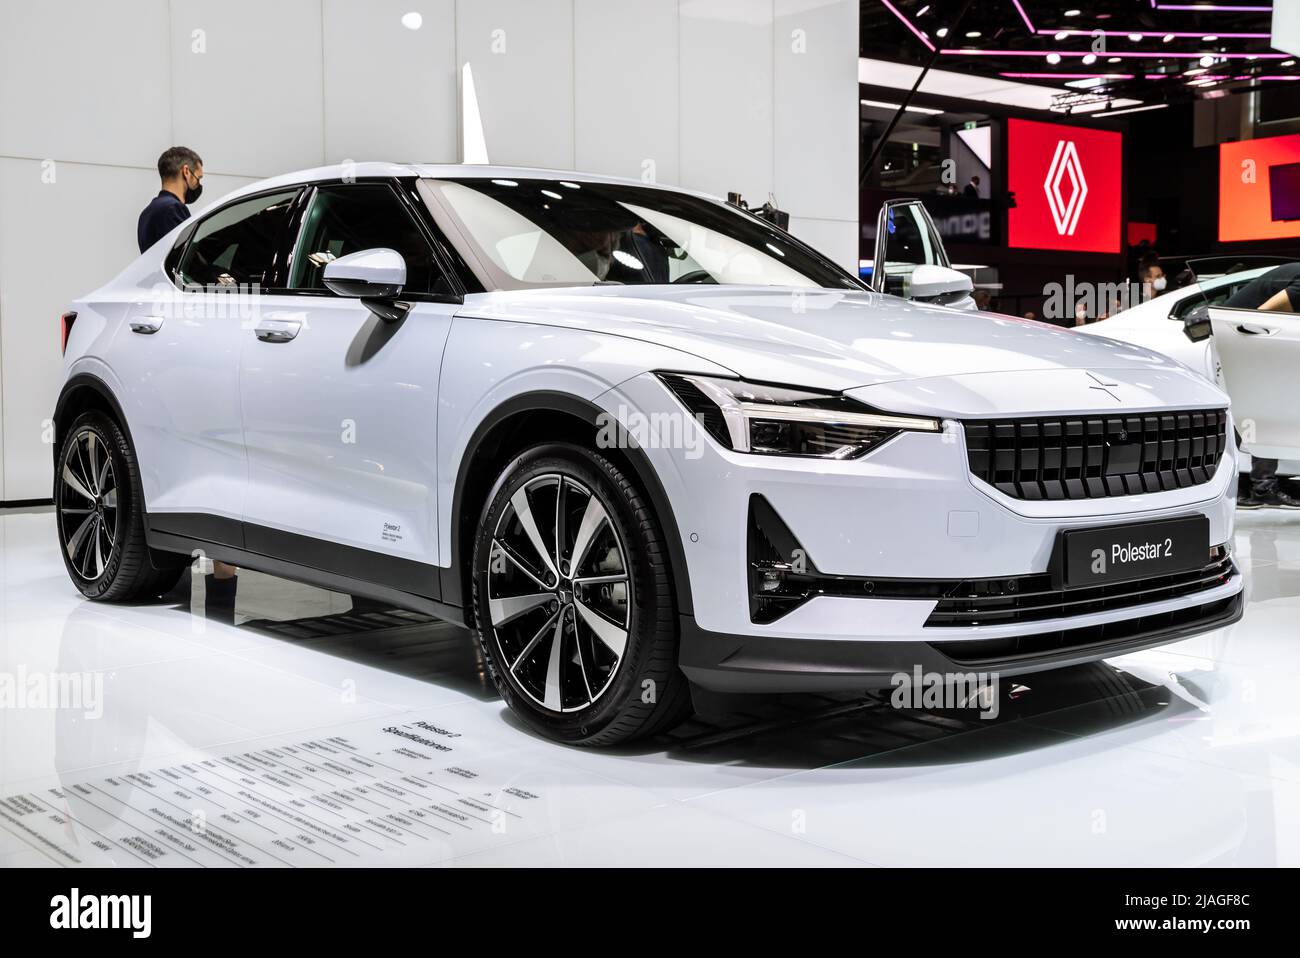 Polestar 2 electric car showcased at the IAA Mobility motor show in Munich, Germany - September 6, 2021 Stock Photo